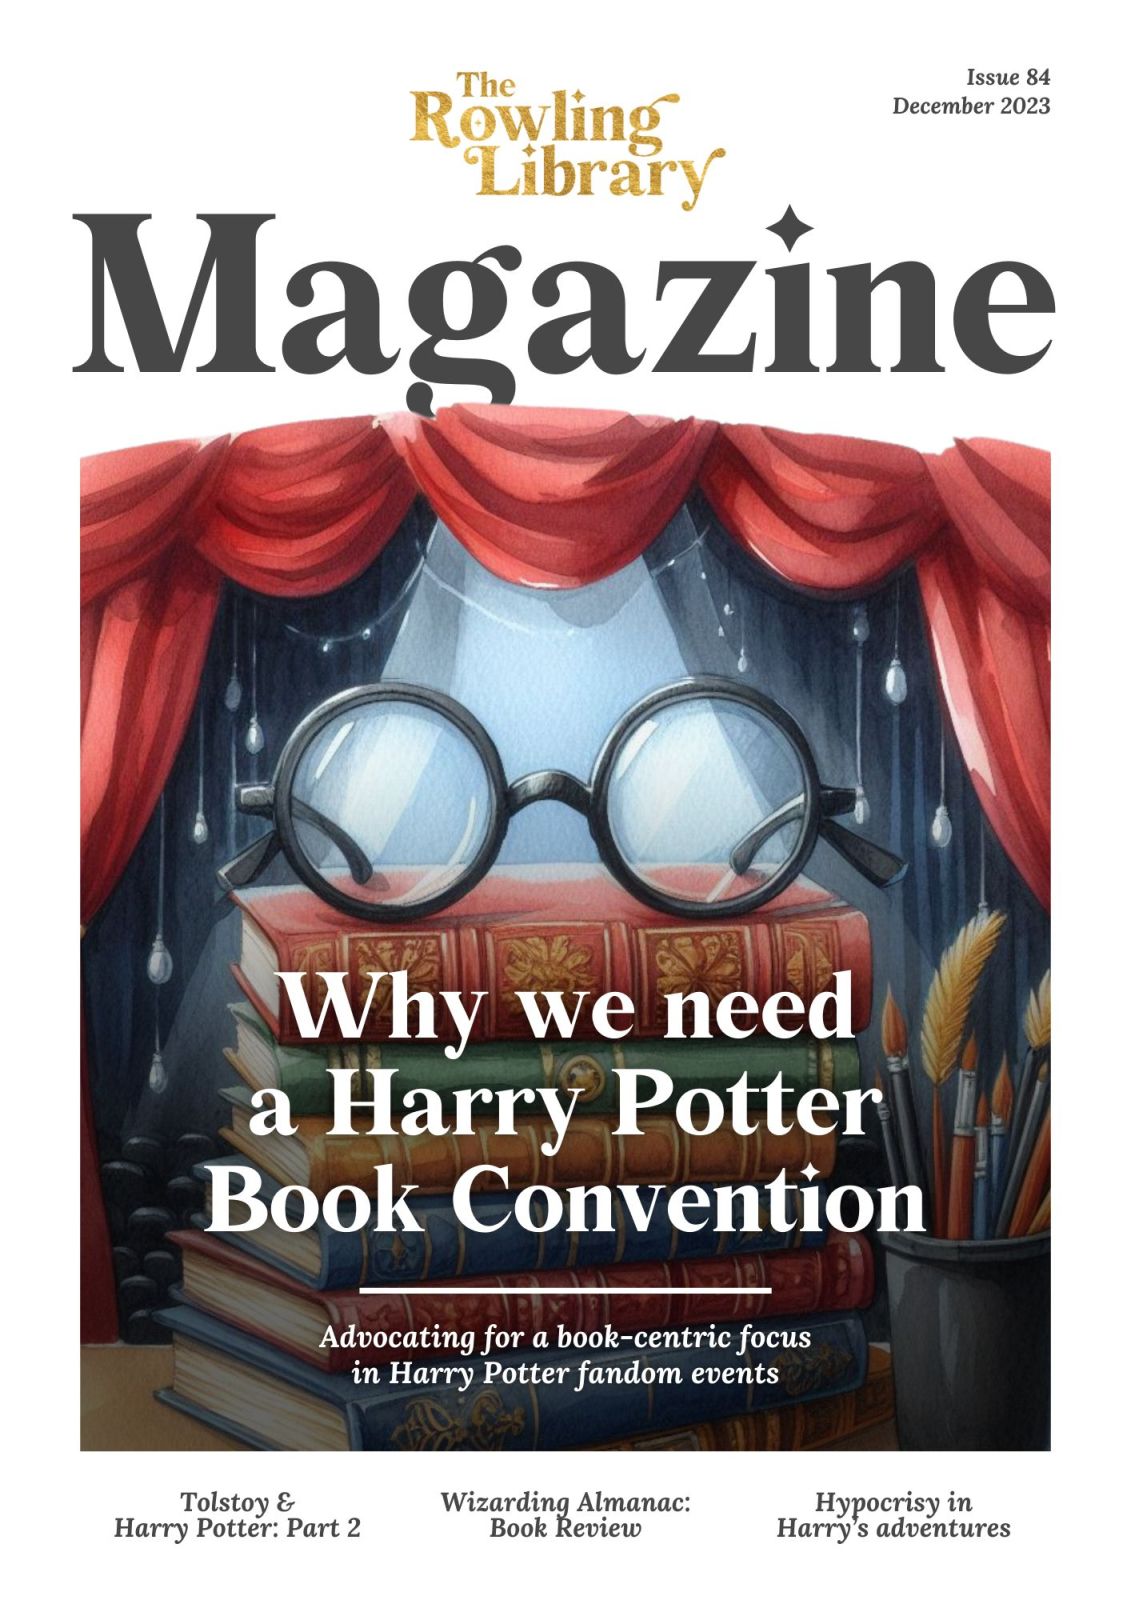 The Rowling Library Magazine #84 (December 2023): Why we need a Harry Potter Book Convention